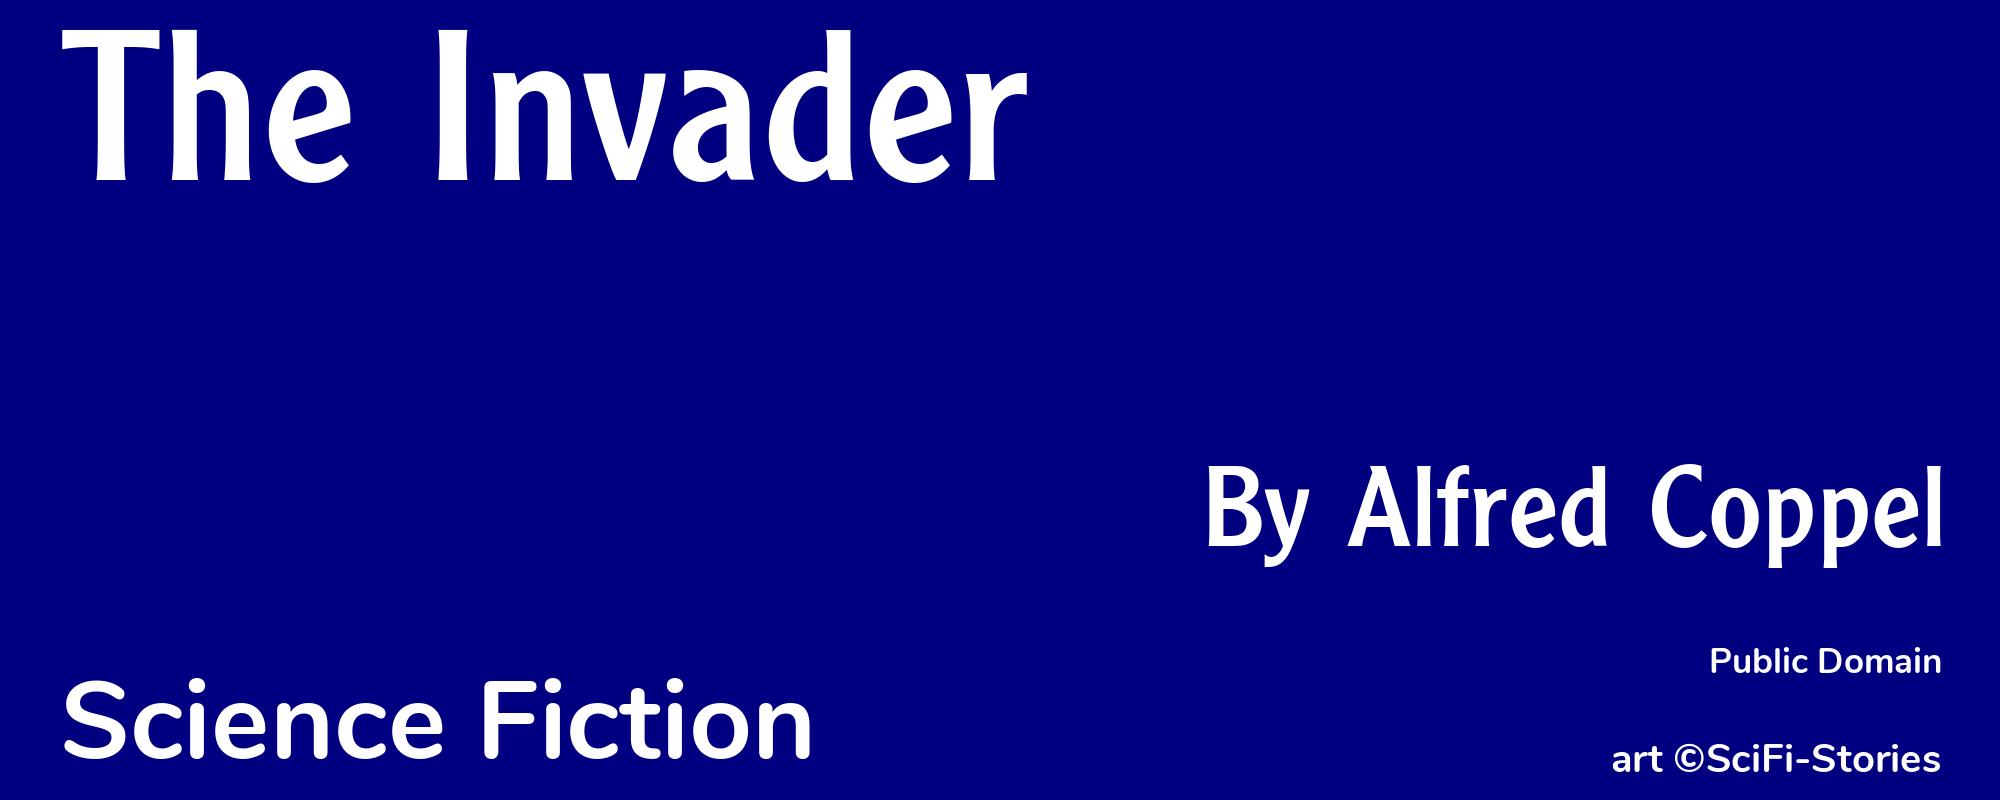 The Invader - Cover